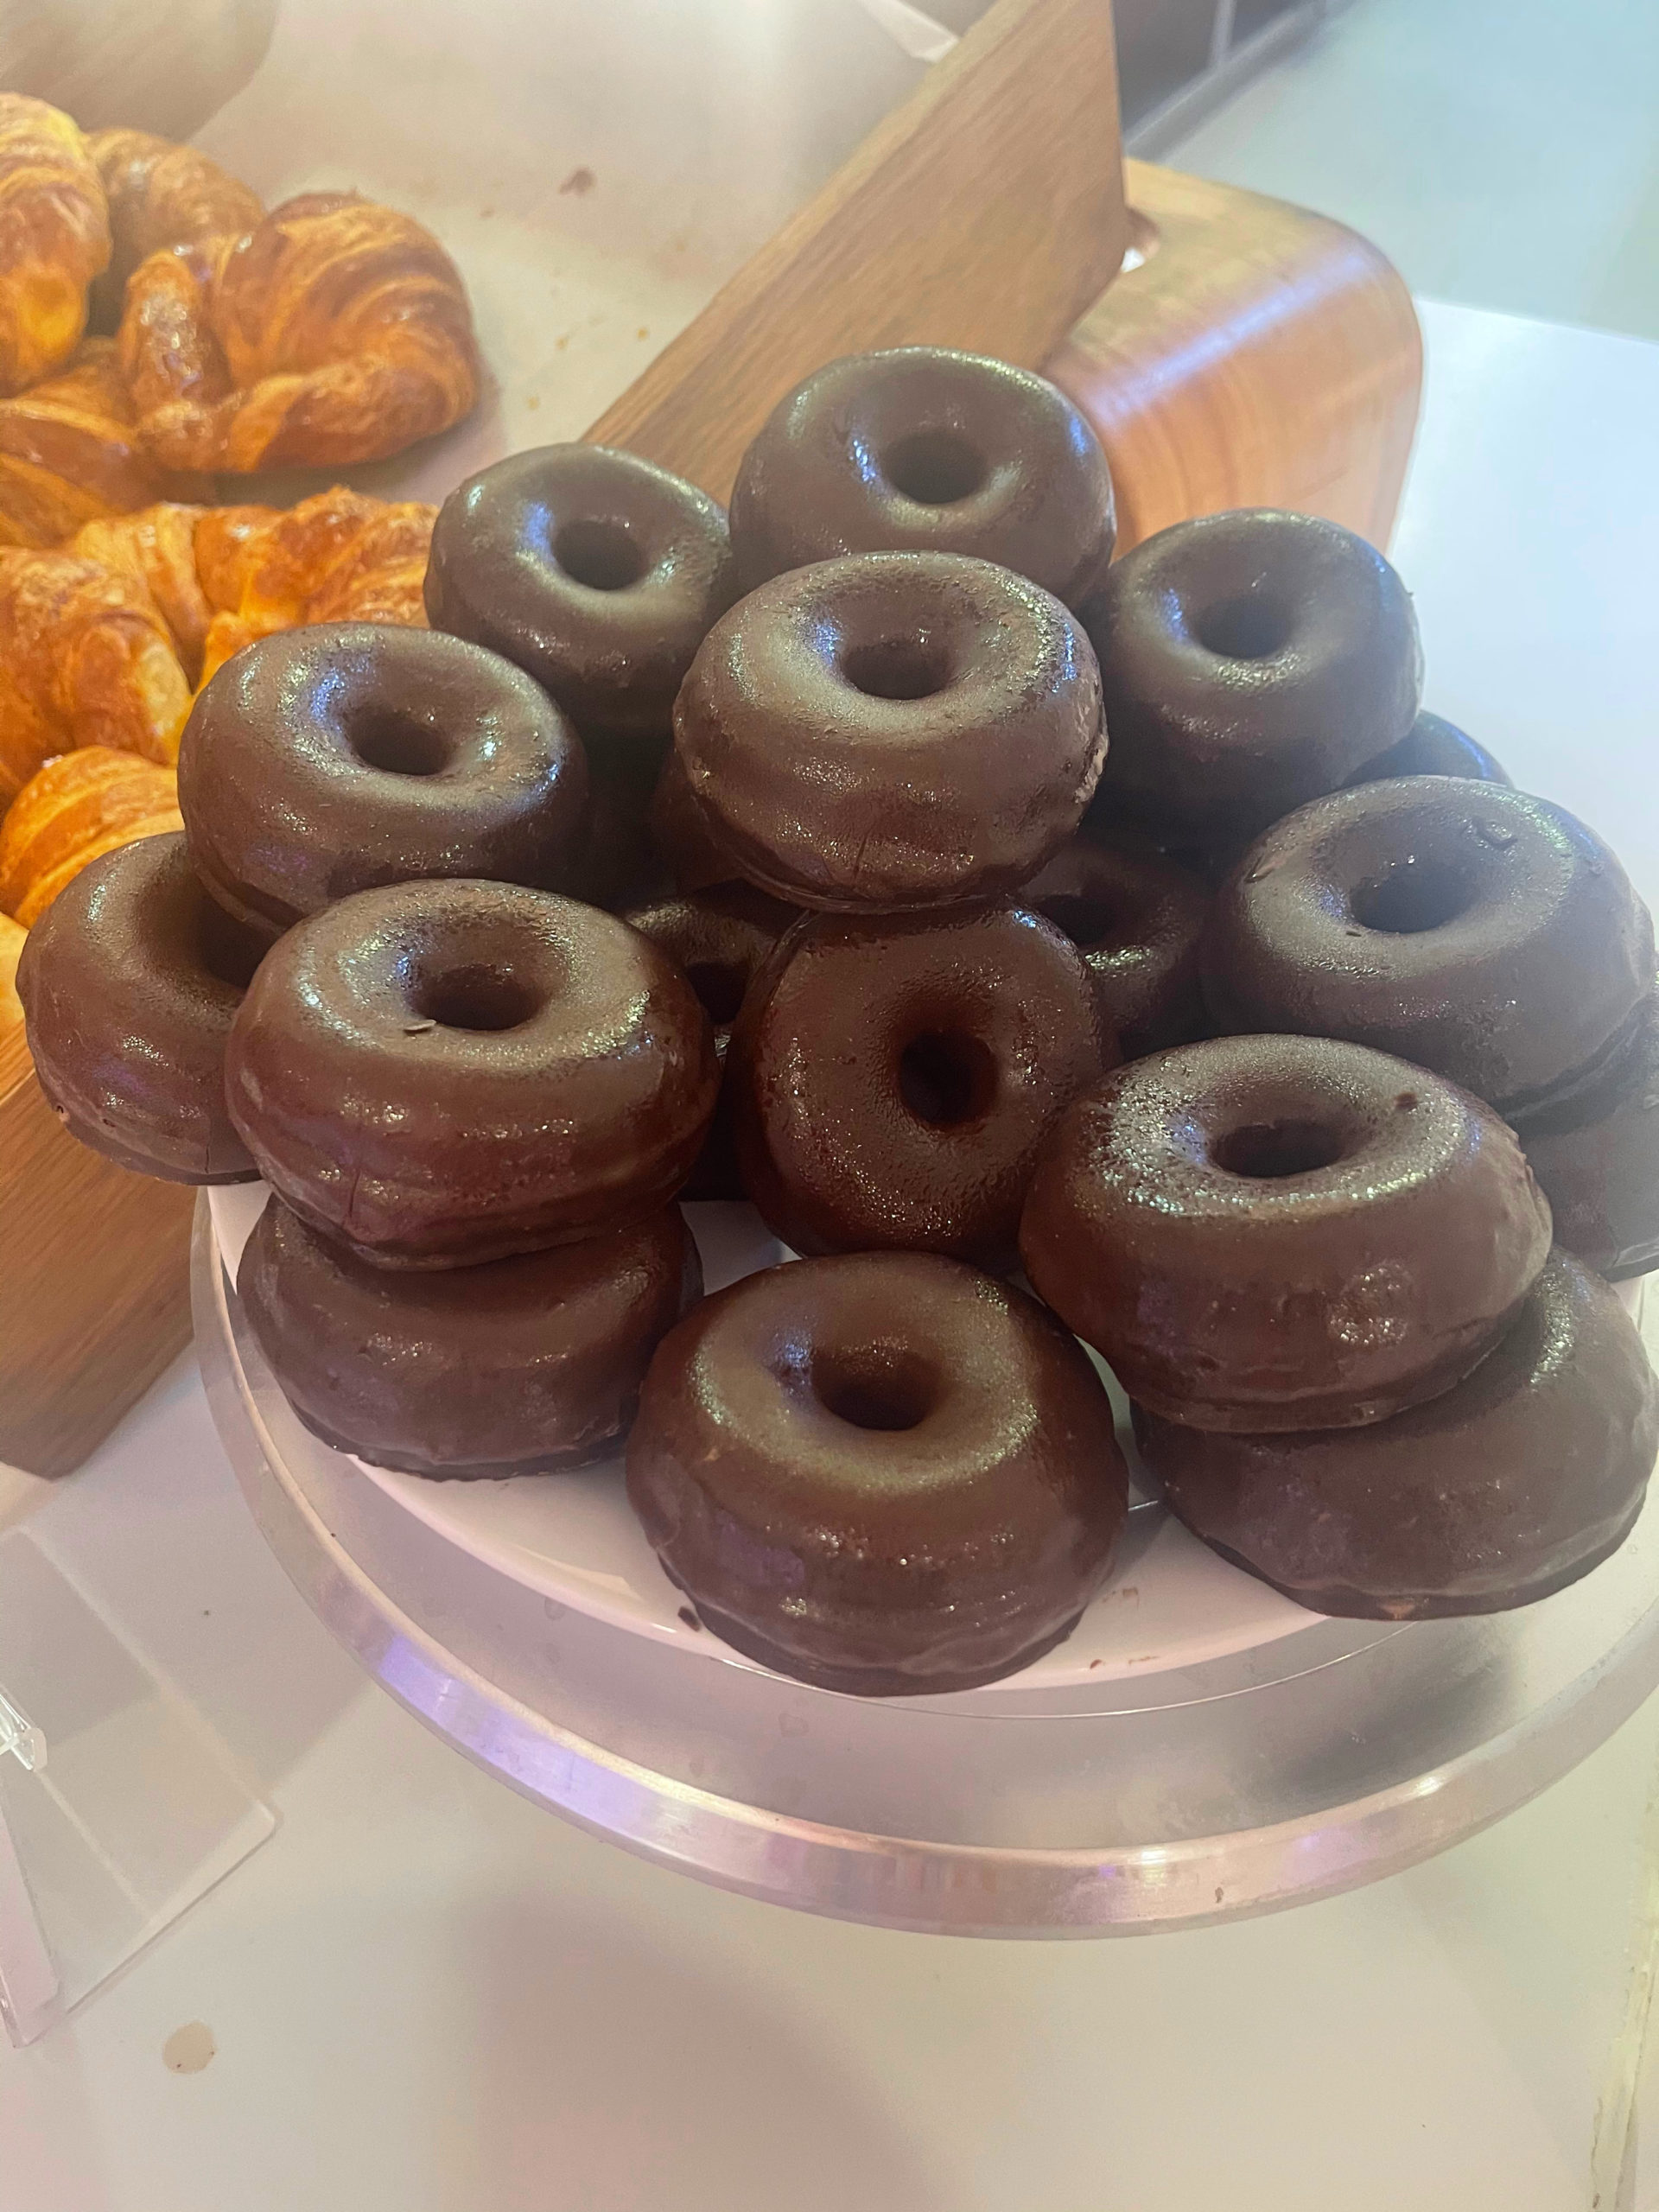 Large platter of chocolate covered doughnuts